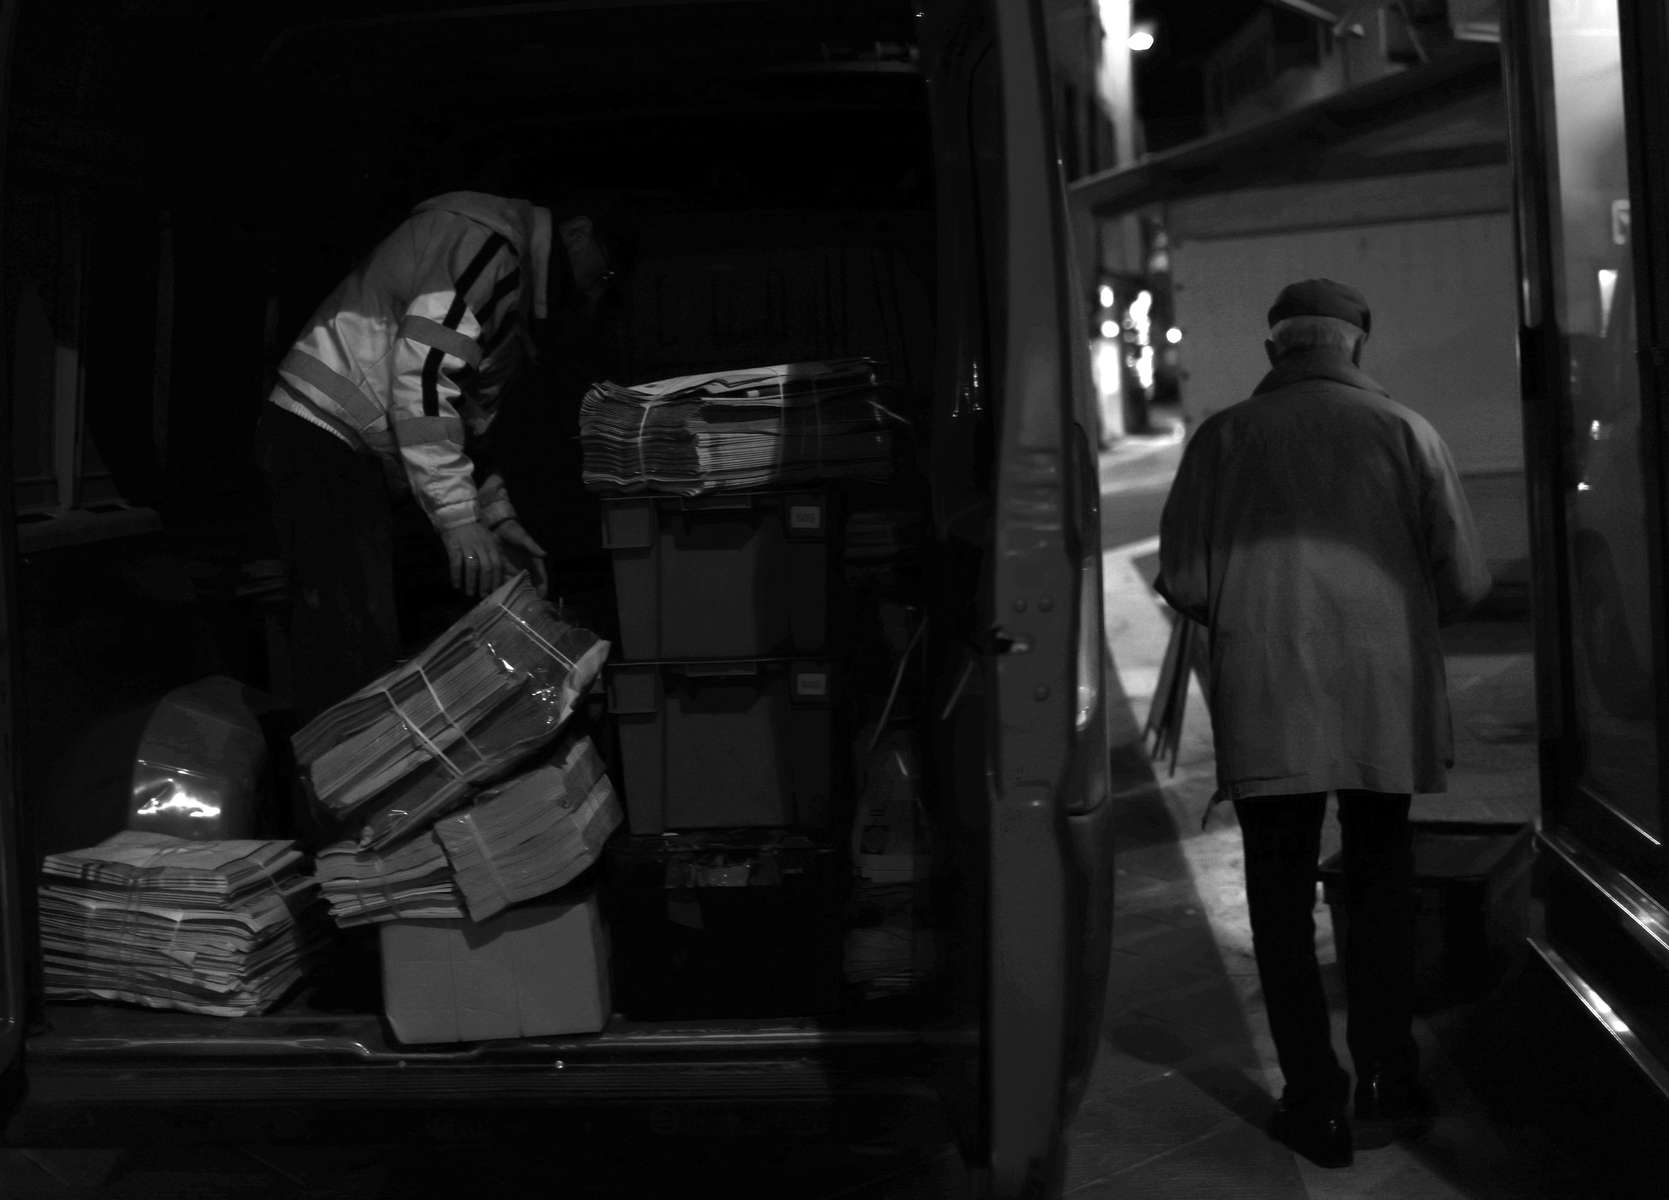 On November 25, 2024, while the city sleeps, newspaper delivery driver Paolo Camorri, left, unloads stacks of the day’s papers to Piero Scartoni, right.  Thousands of newsstands in Italy vanish each year.  One quarter of Italian towns no longer have a newsstand.  In the past twenty years, seventy percent of Italy's newsstands have closed.  